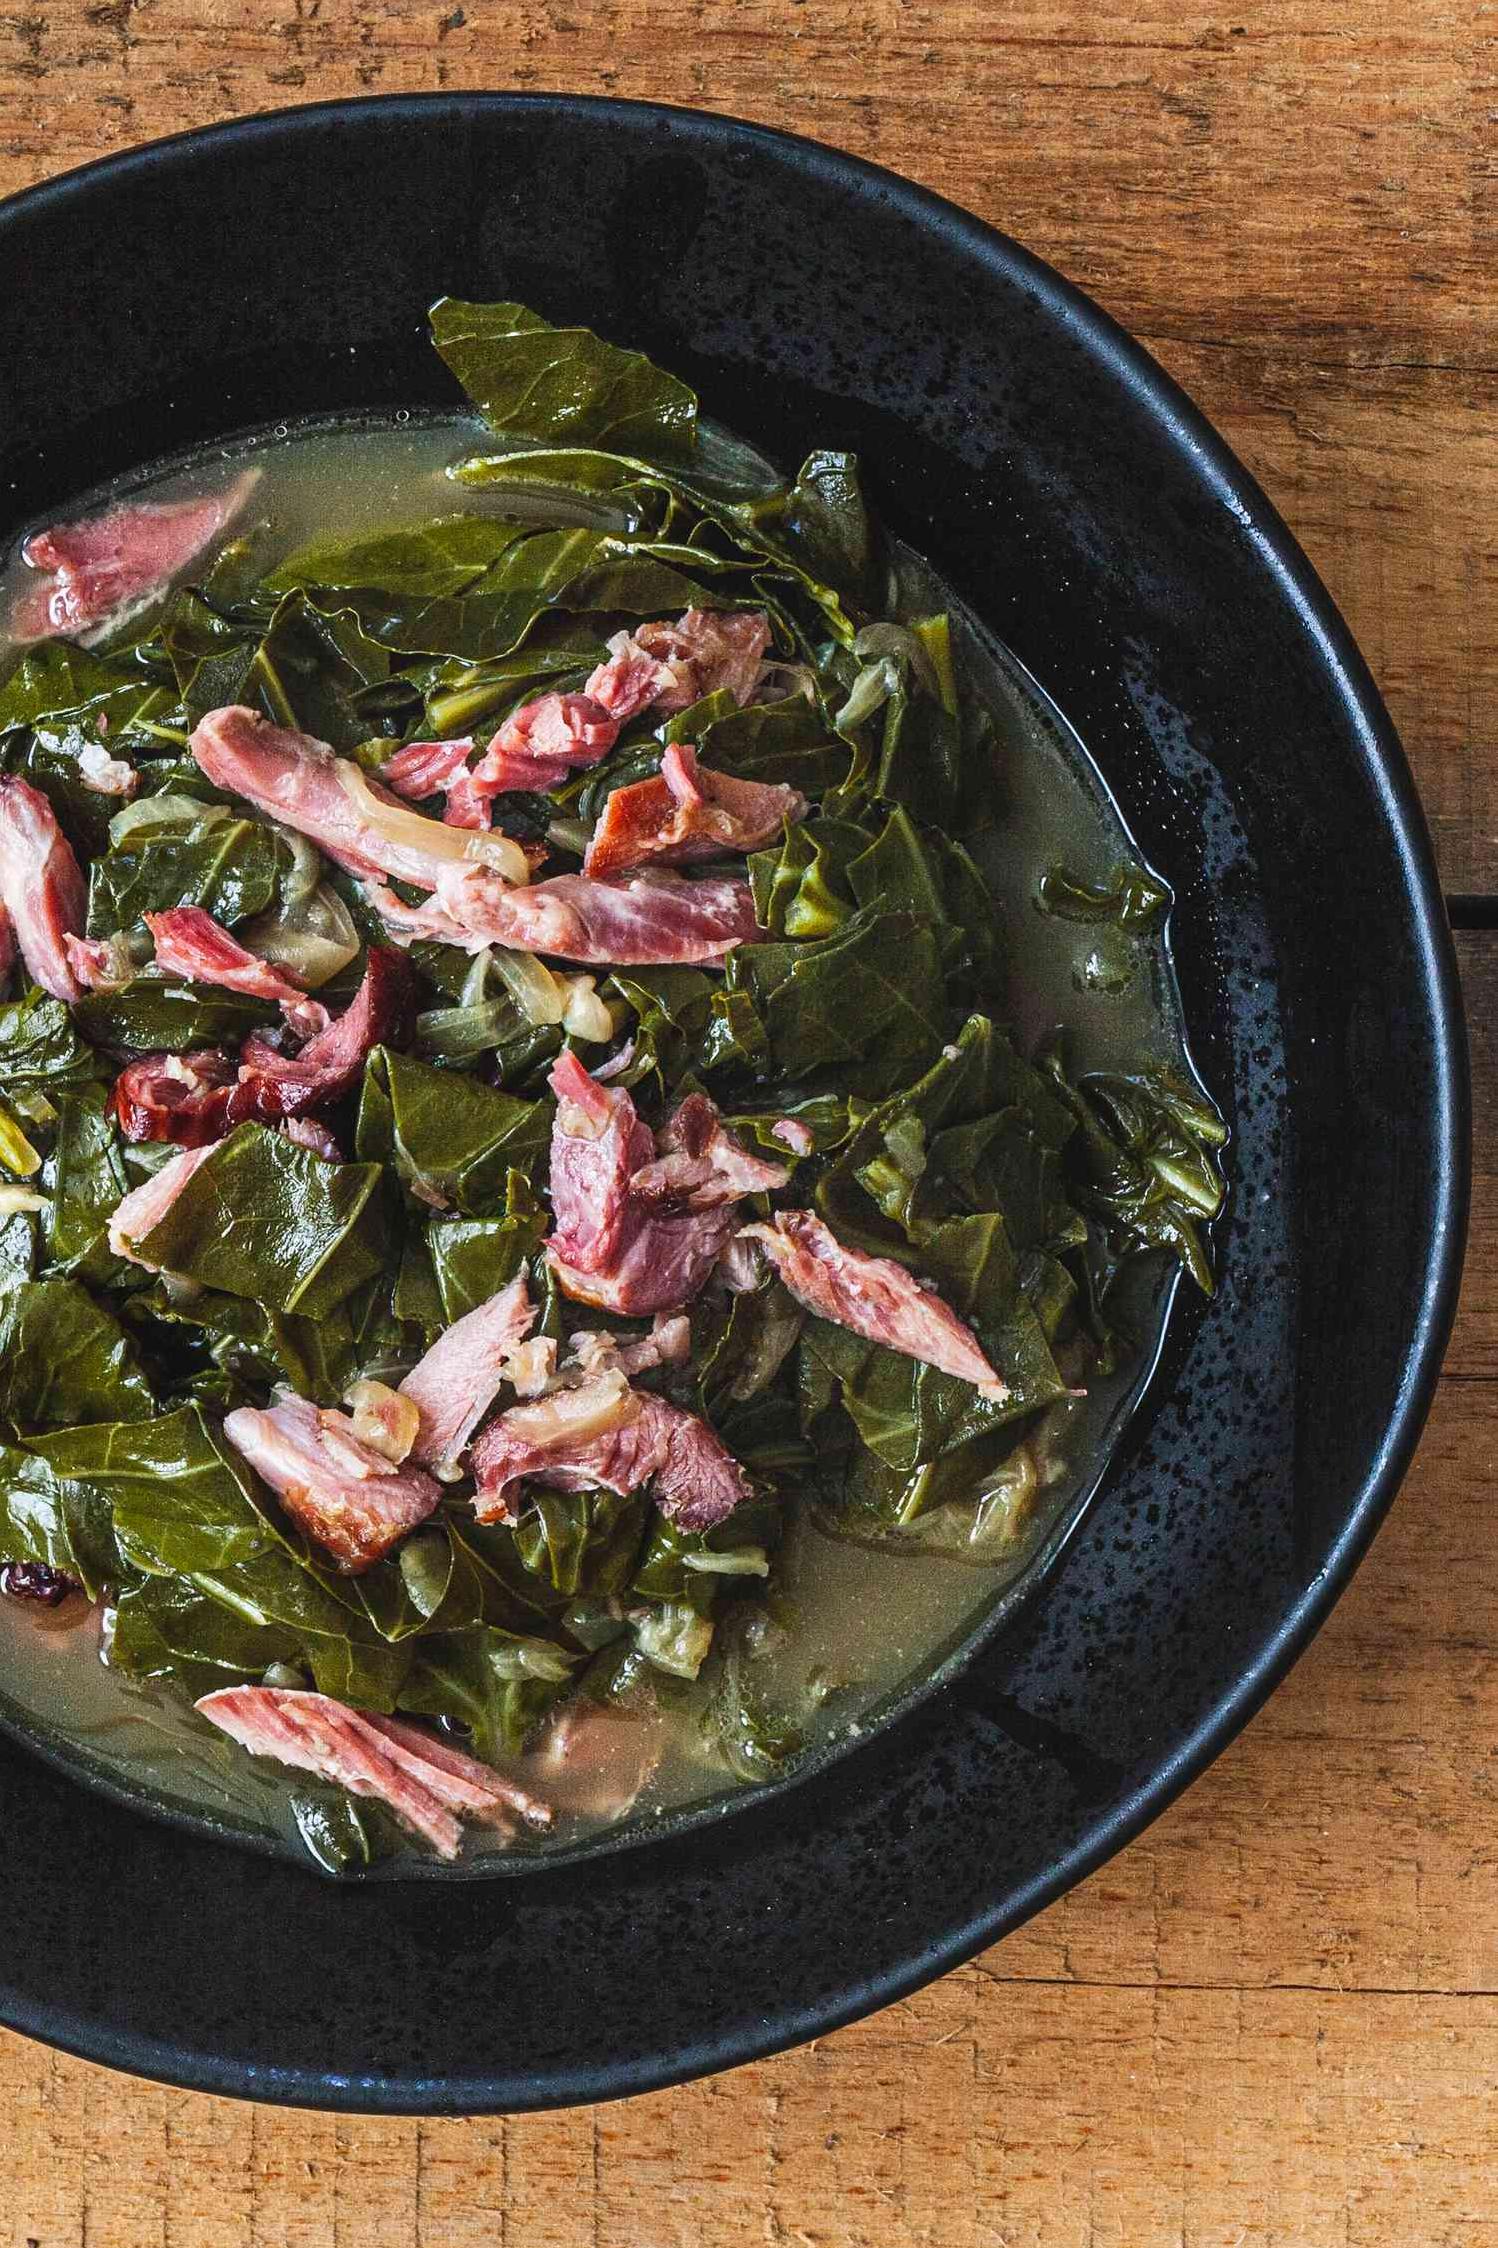  Pair these greens with some classic cornbread for the ultimate southern meal